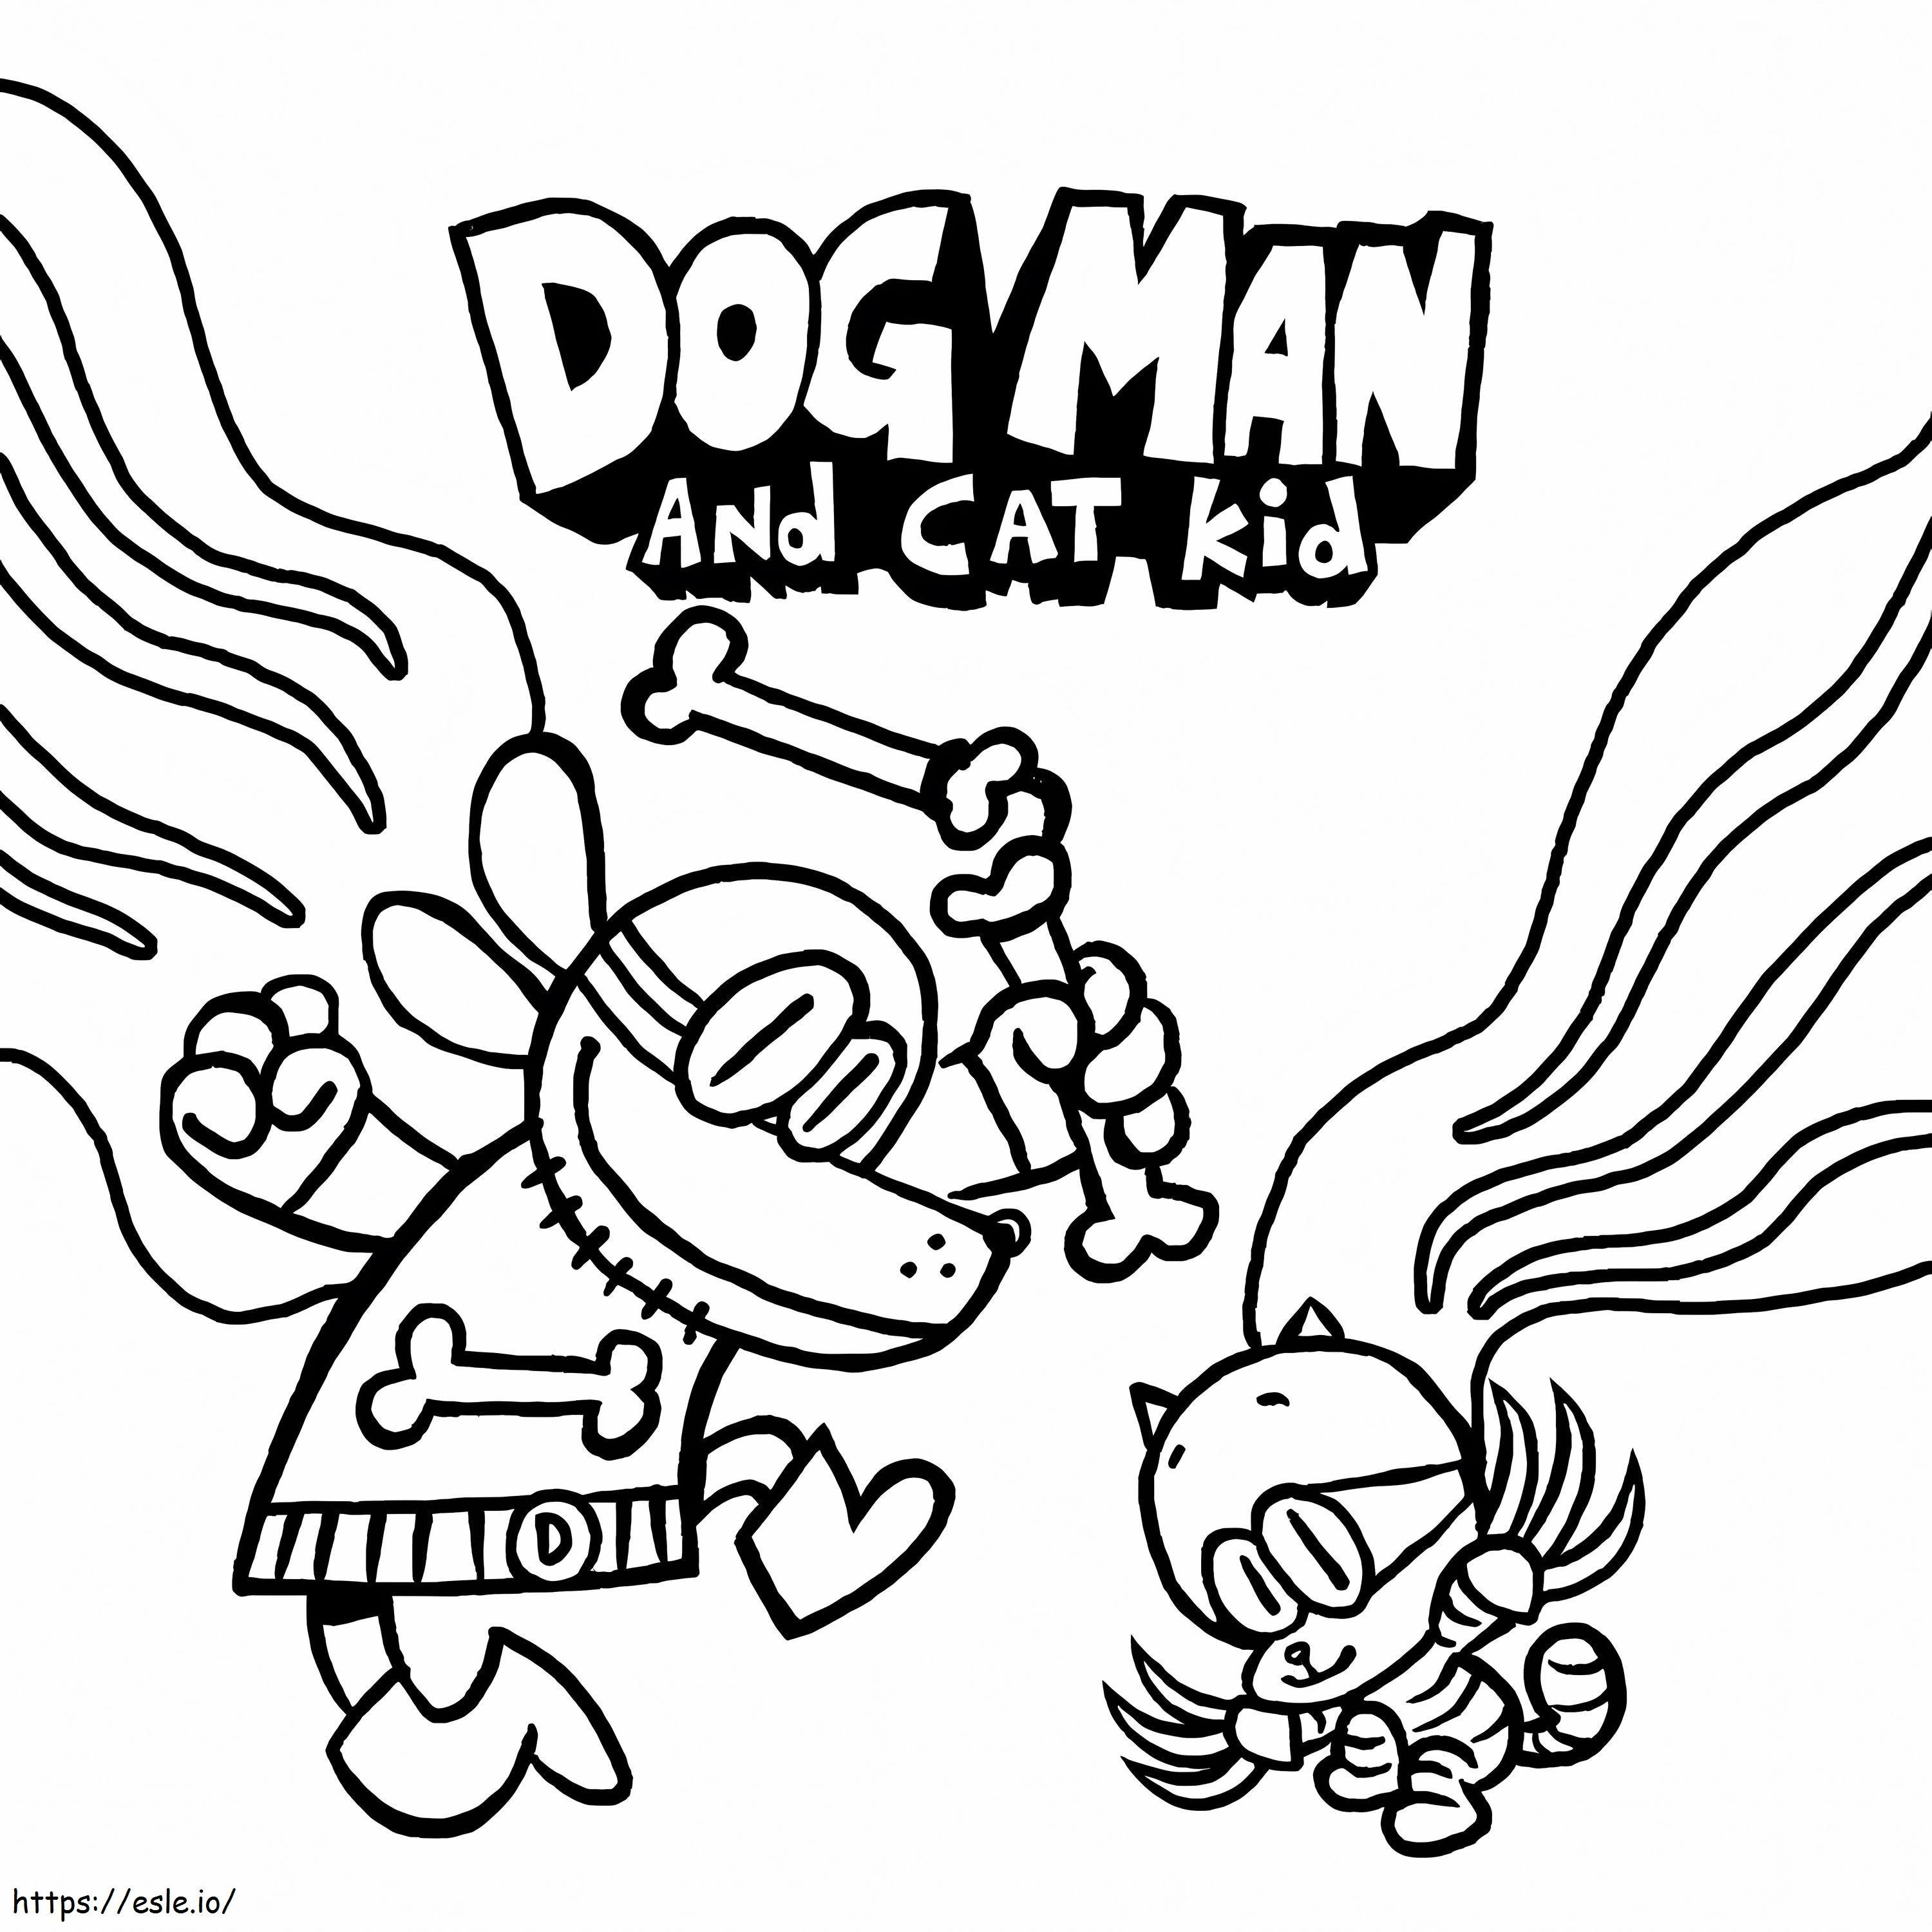 Dog Man And Cute Cat coloring page